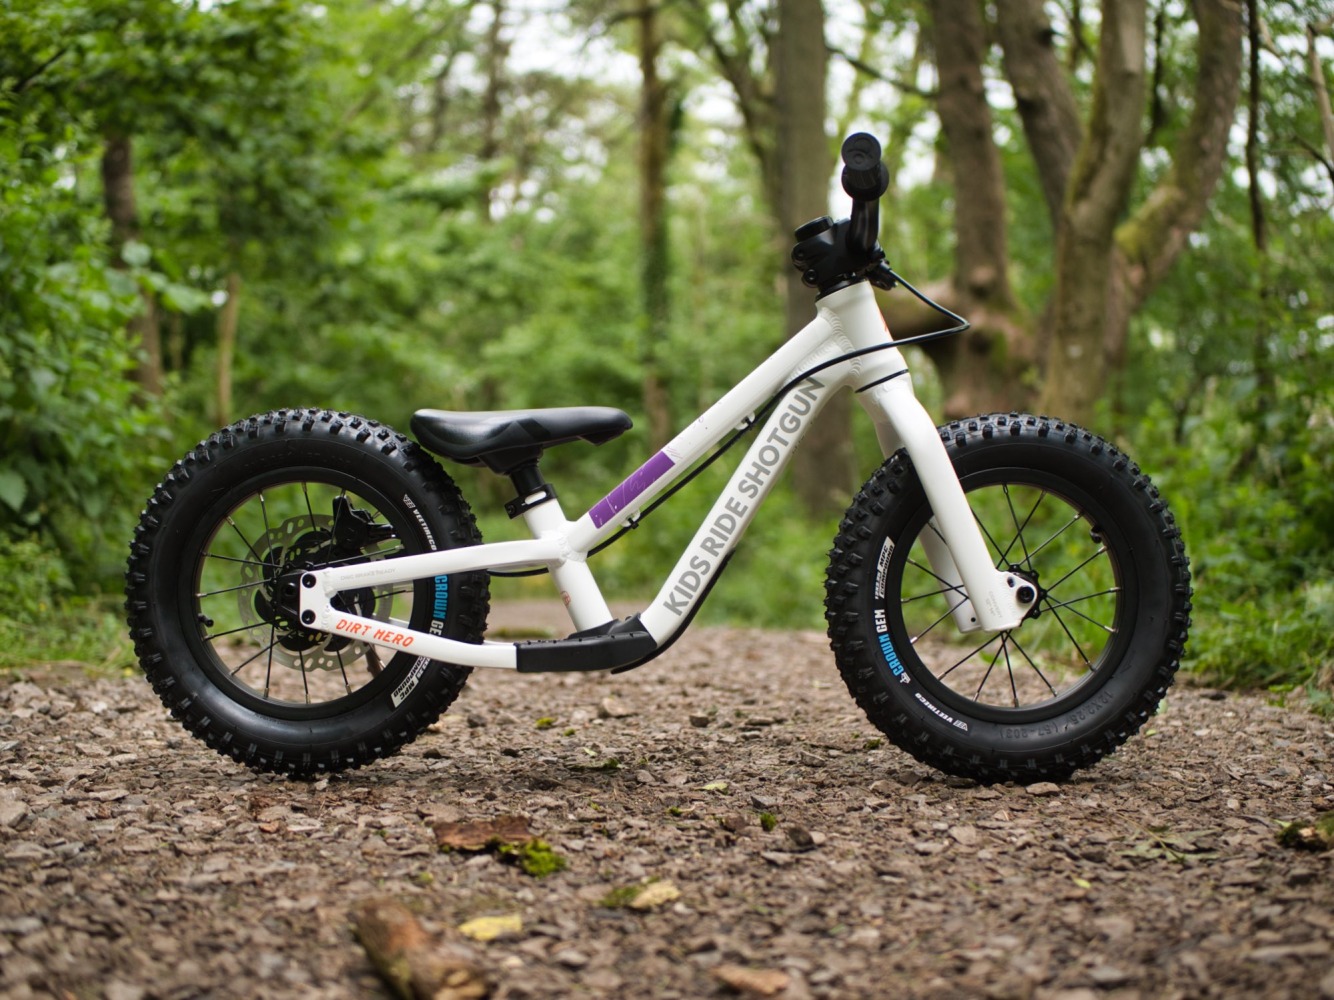 A side view of the Shotgun Dirt Hero balance bike photographed in the woods